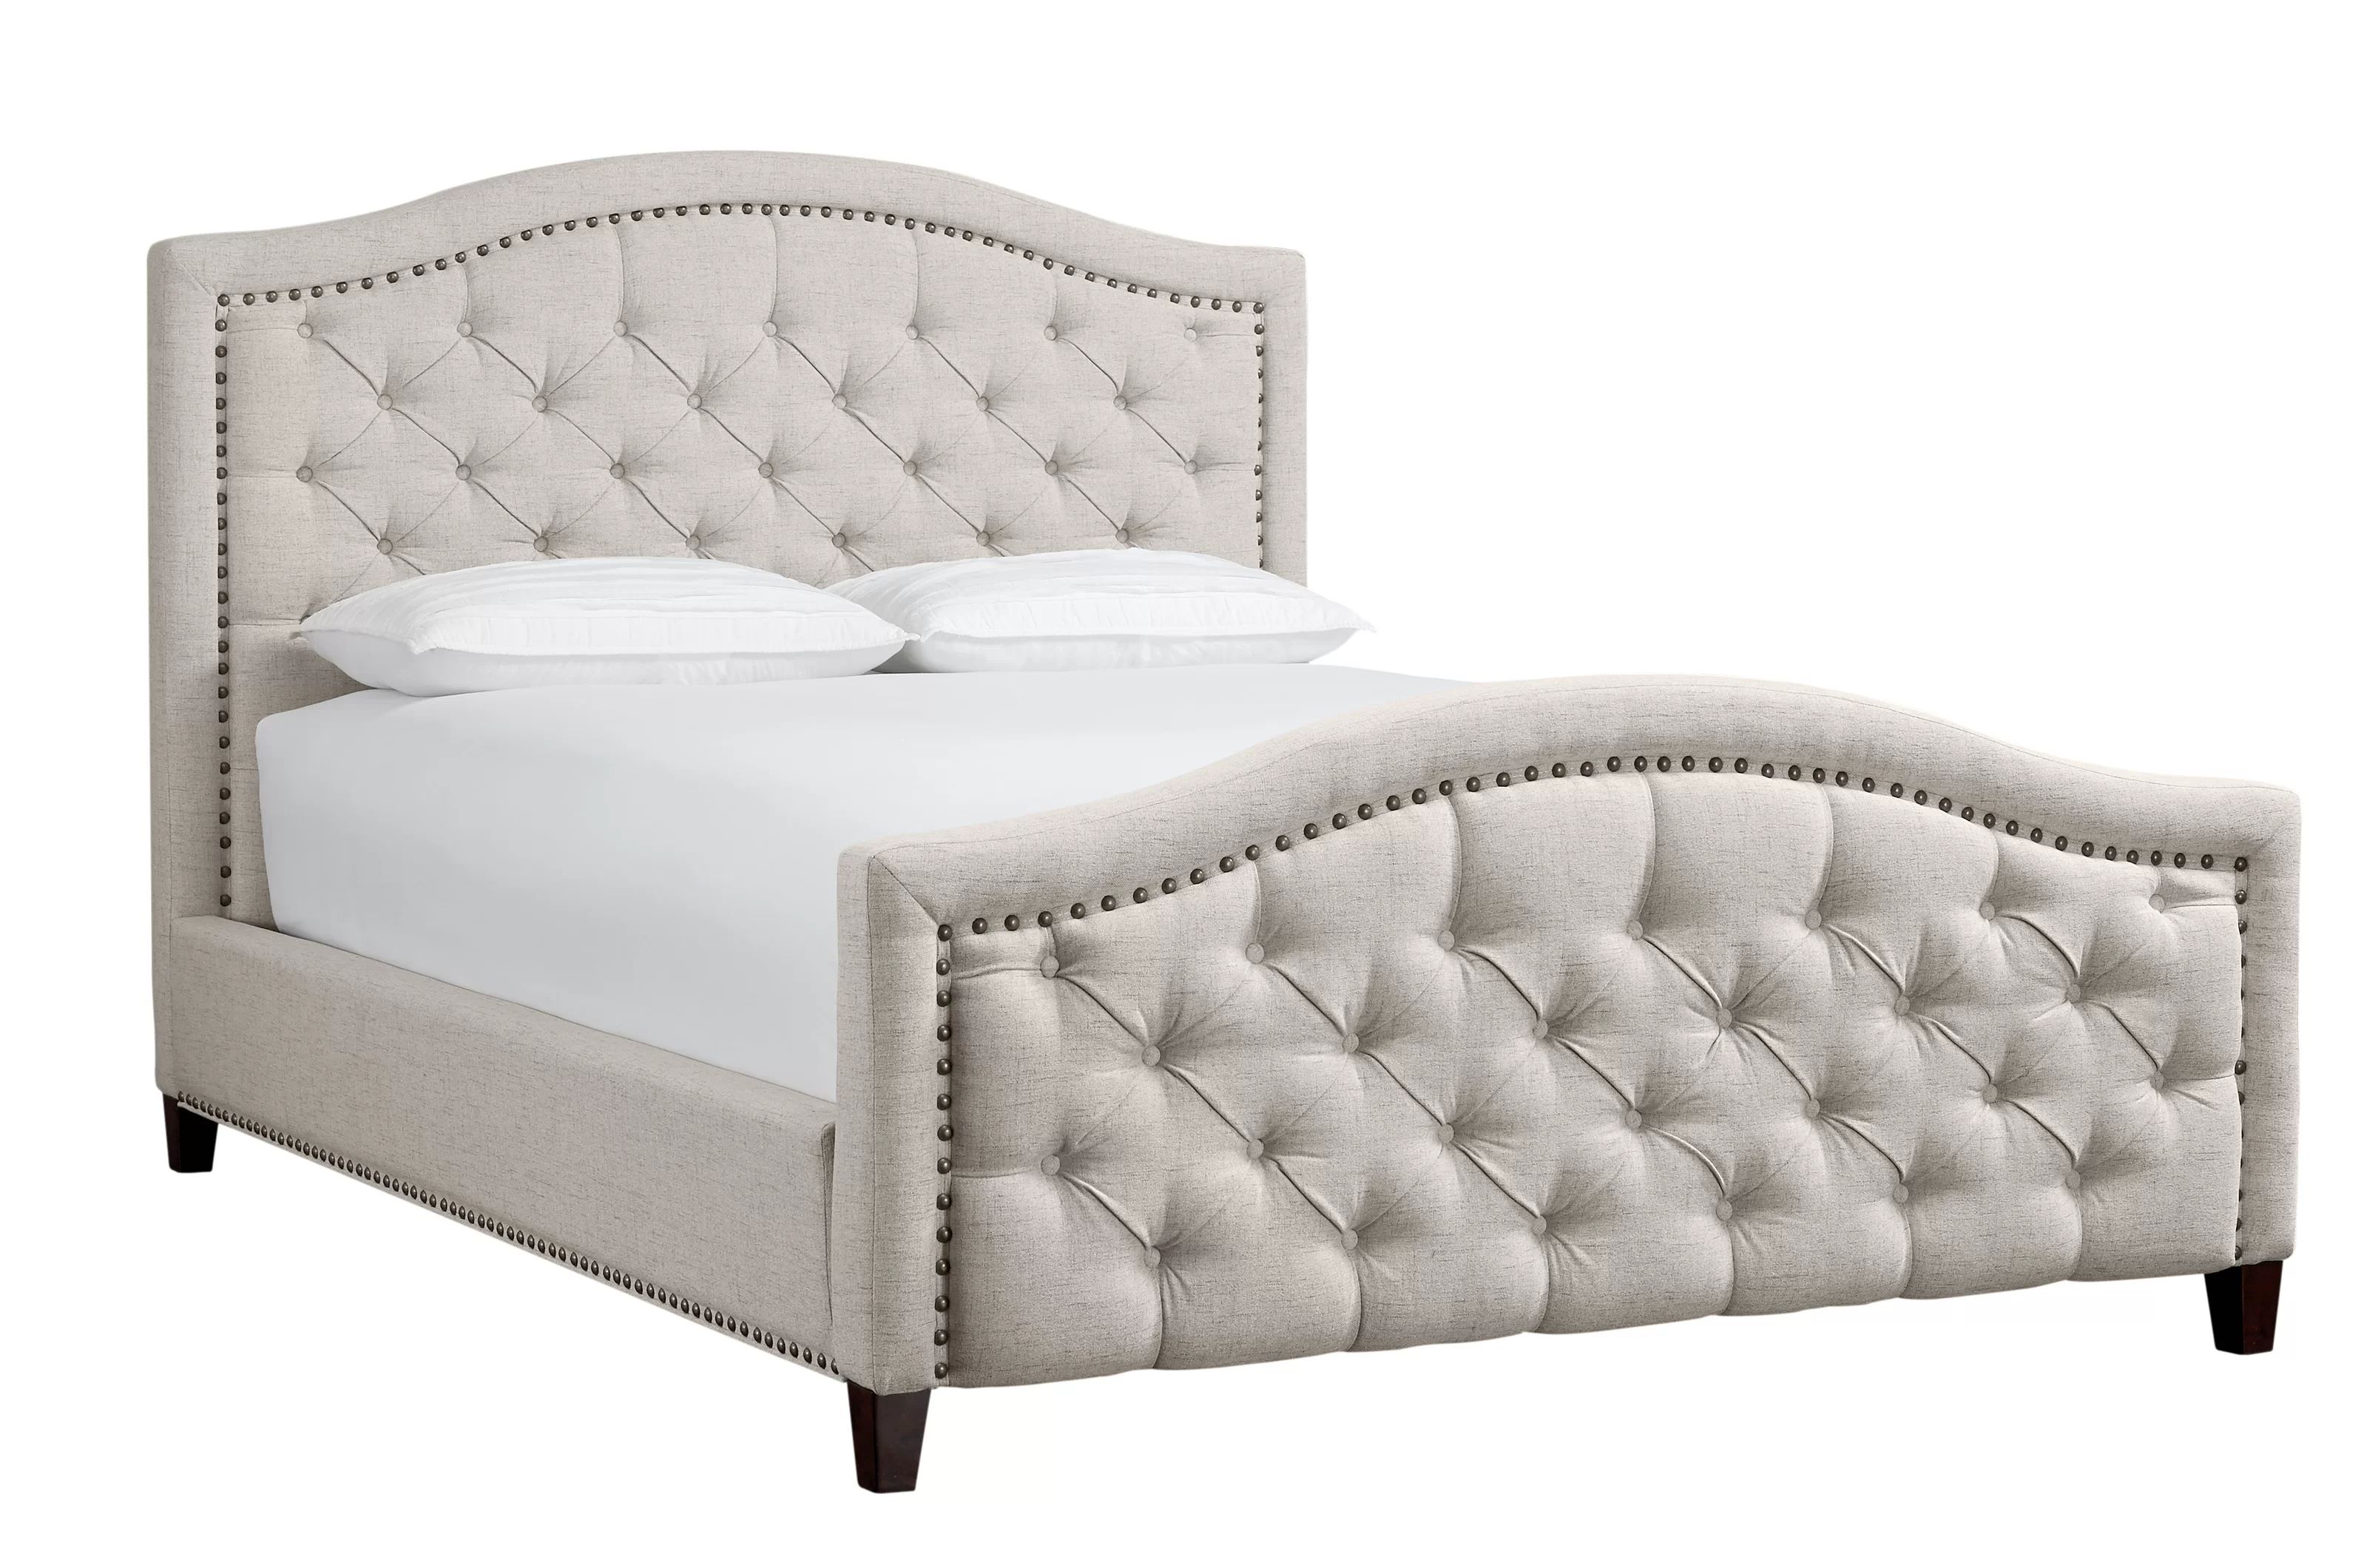 Petersfield Tufted Upholstered Low Profile Bed | Wayfair North America